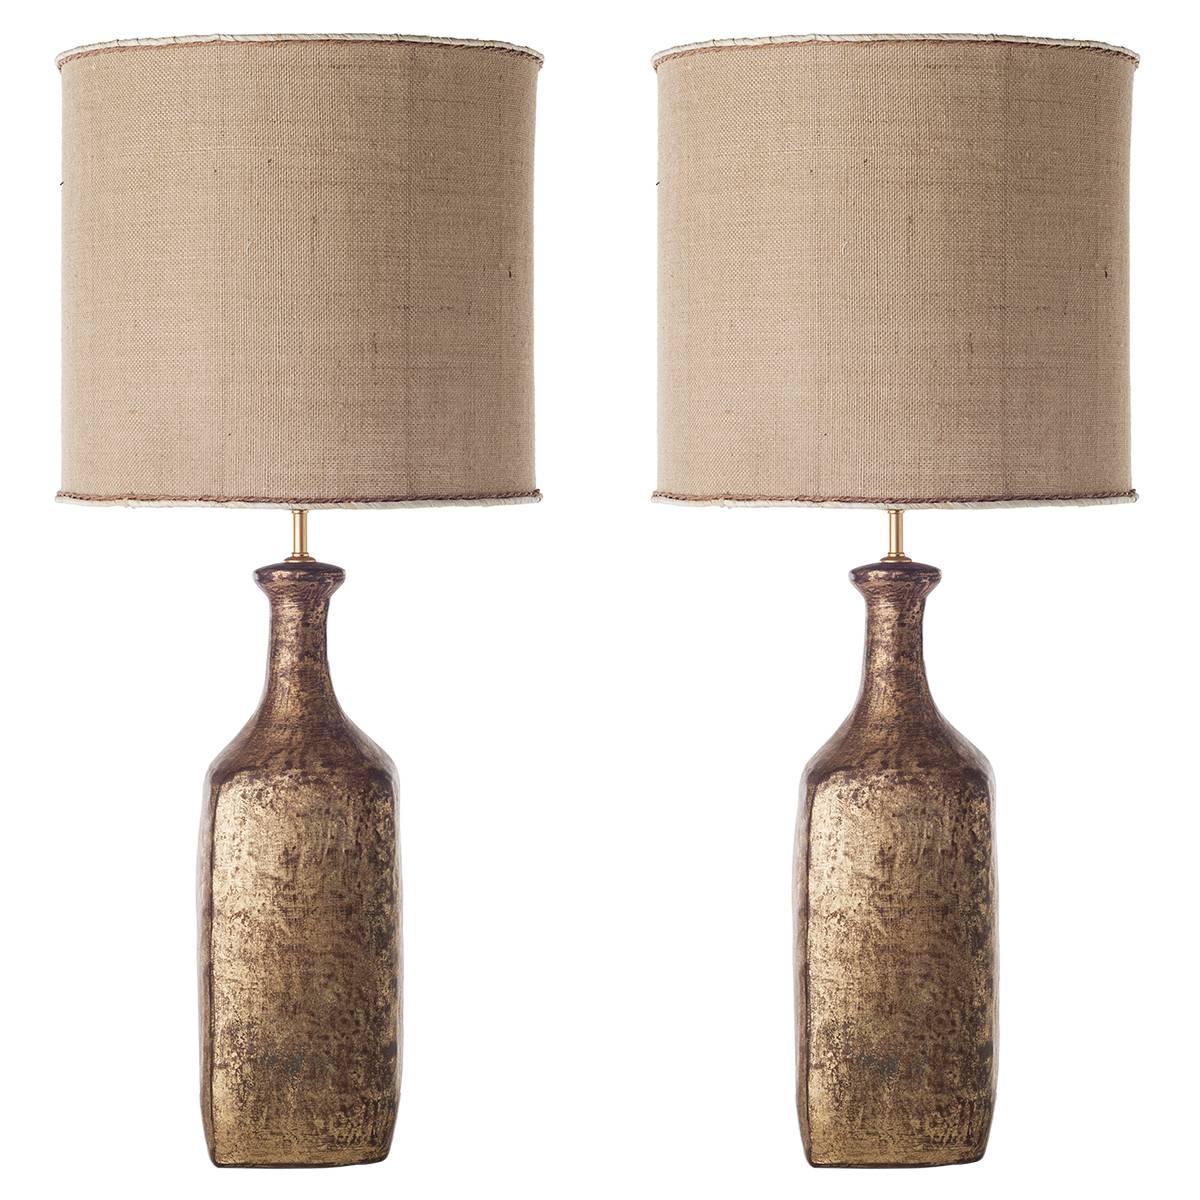 Bottle Ceramic Table Lamps For Sale